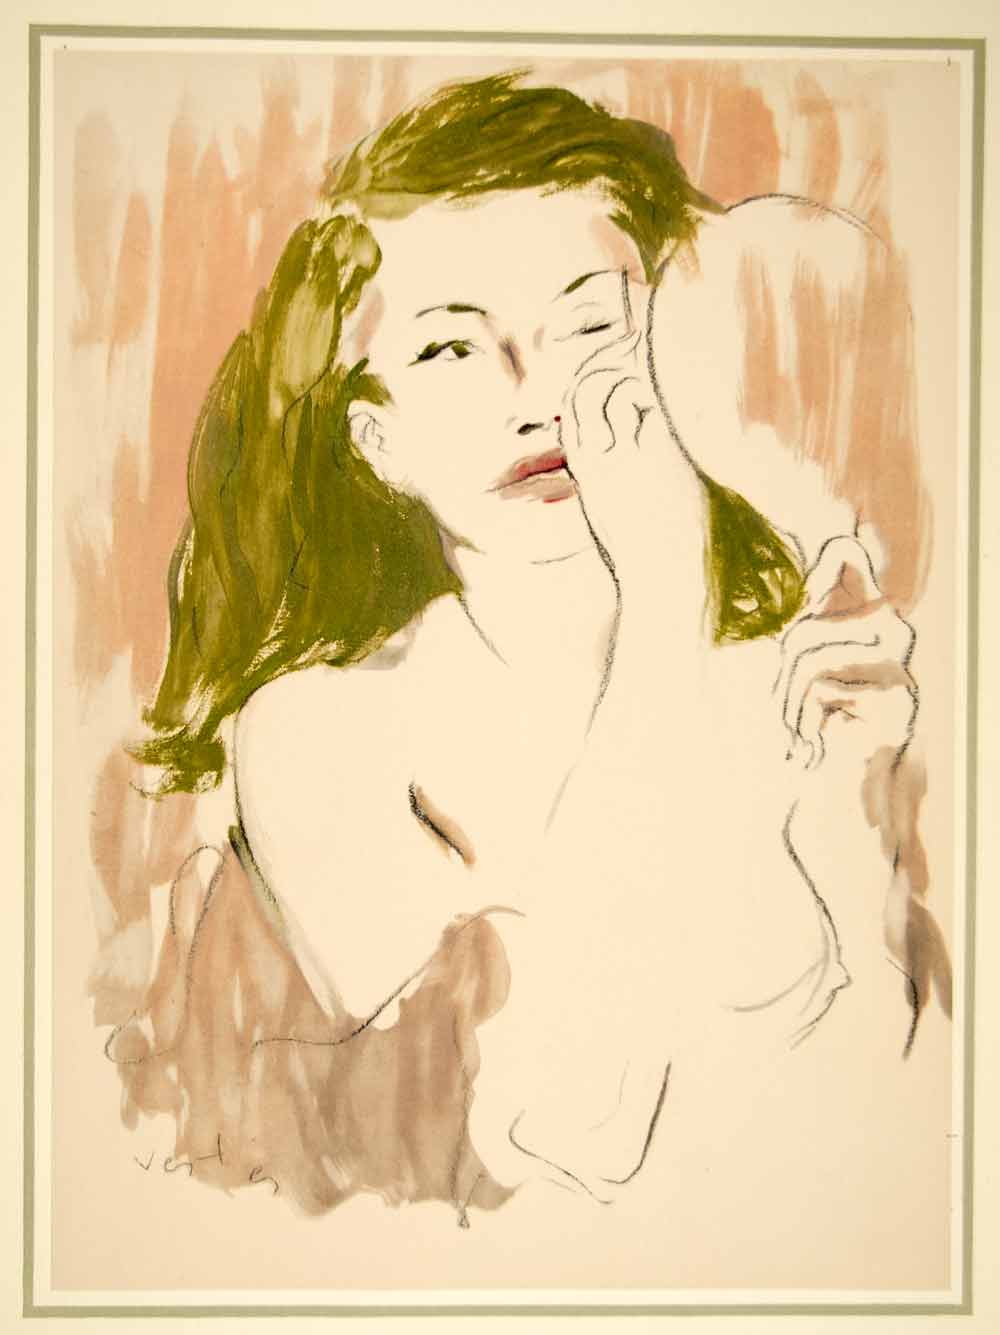 1941 Hand-Colored Lithograph Marcel Vertes Art Raised Eyebrows Nude Hand Mirror